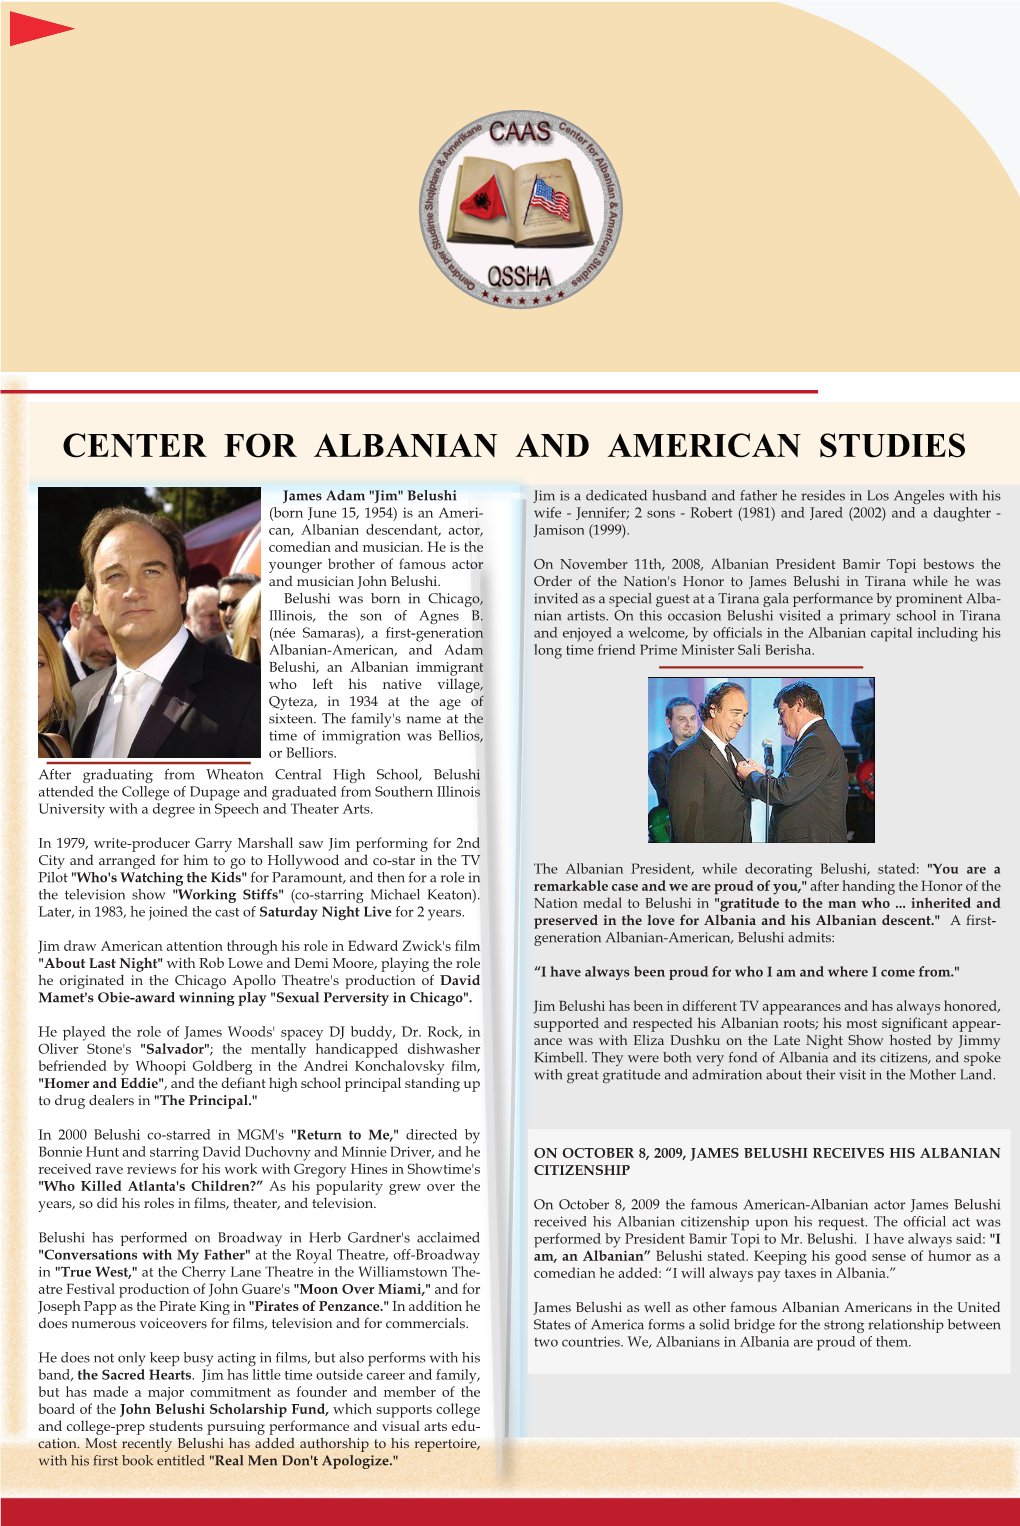 Center for Albanian and American Studies